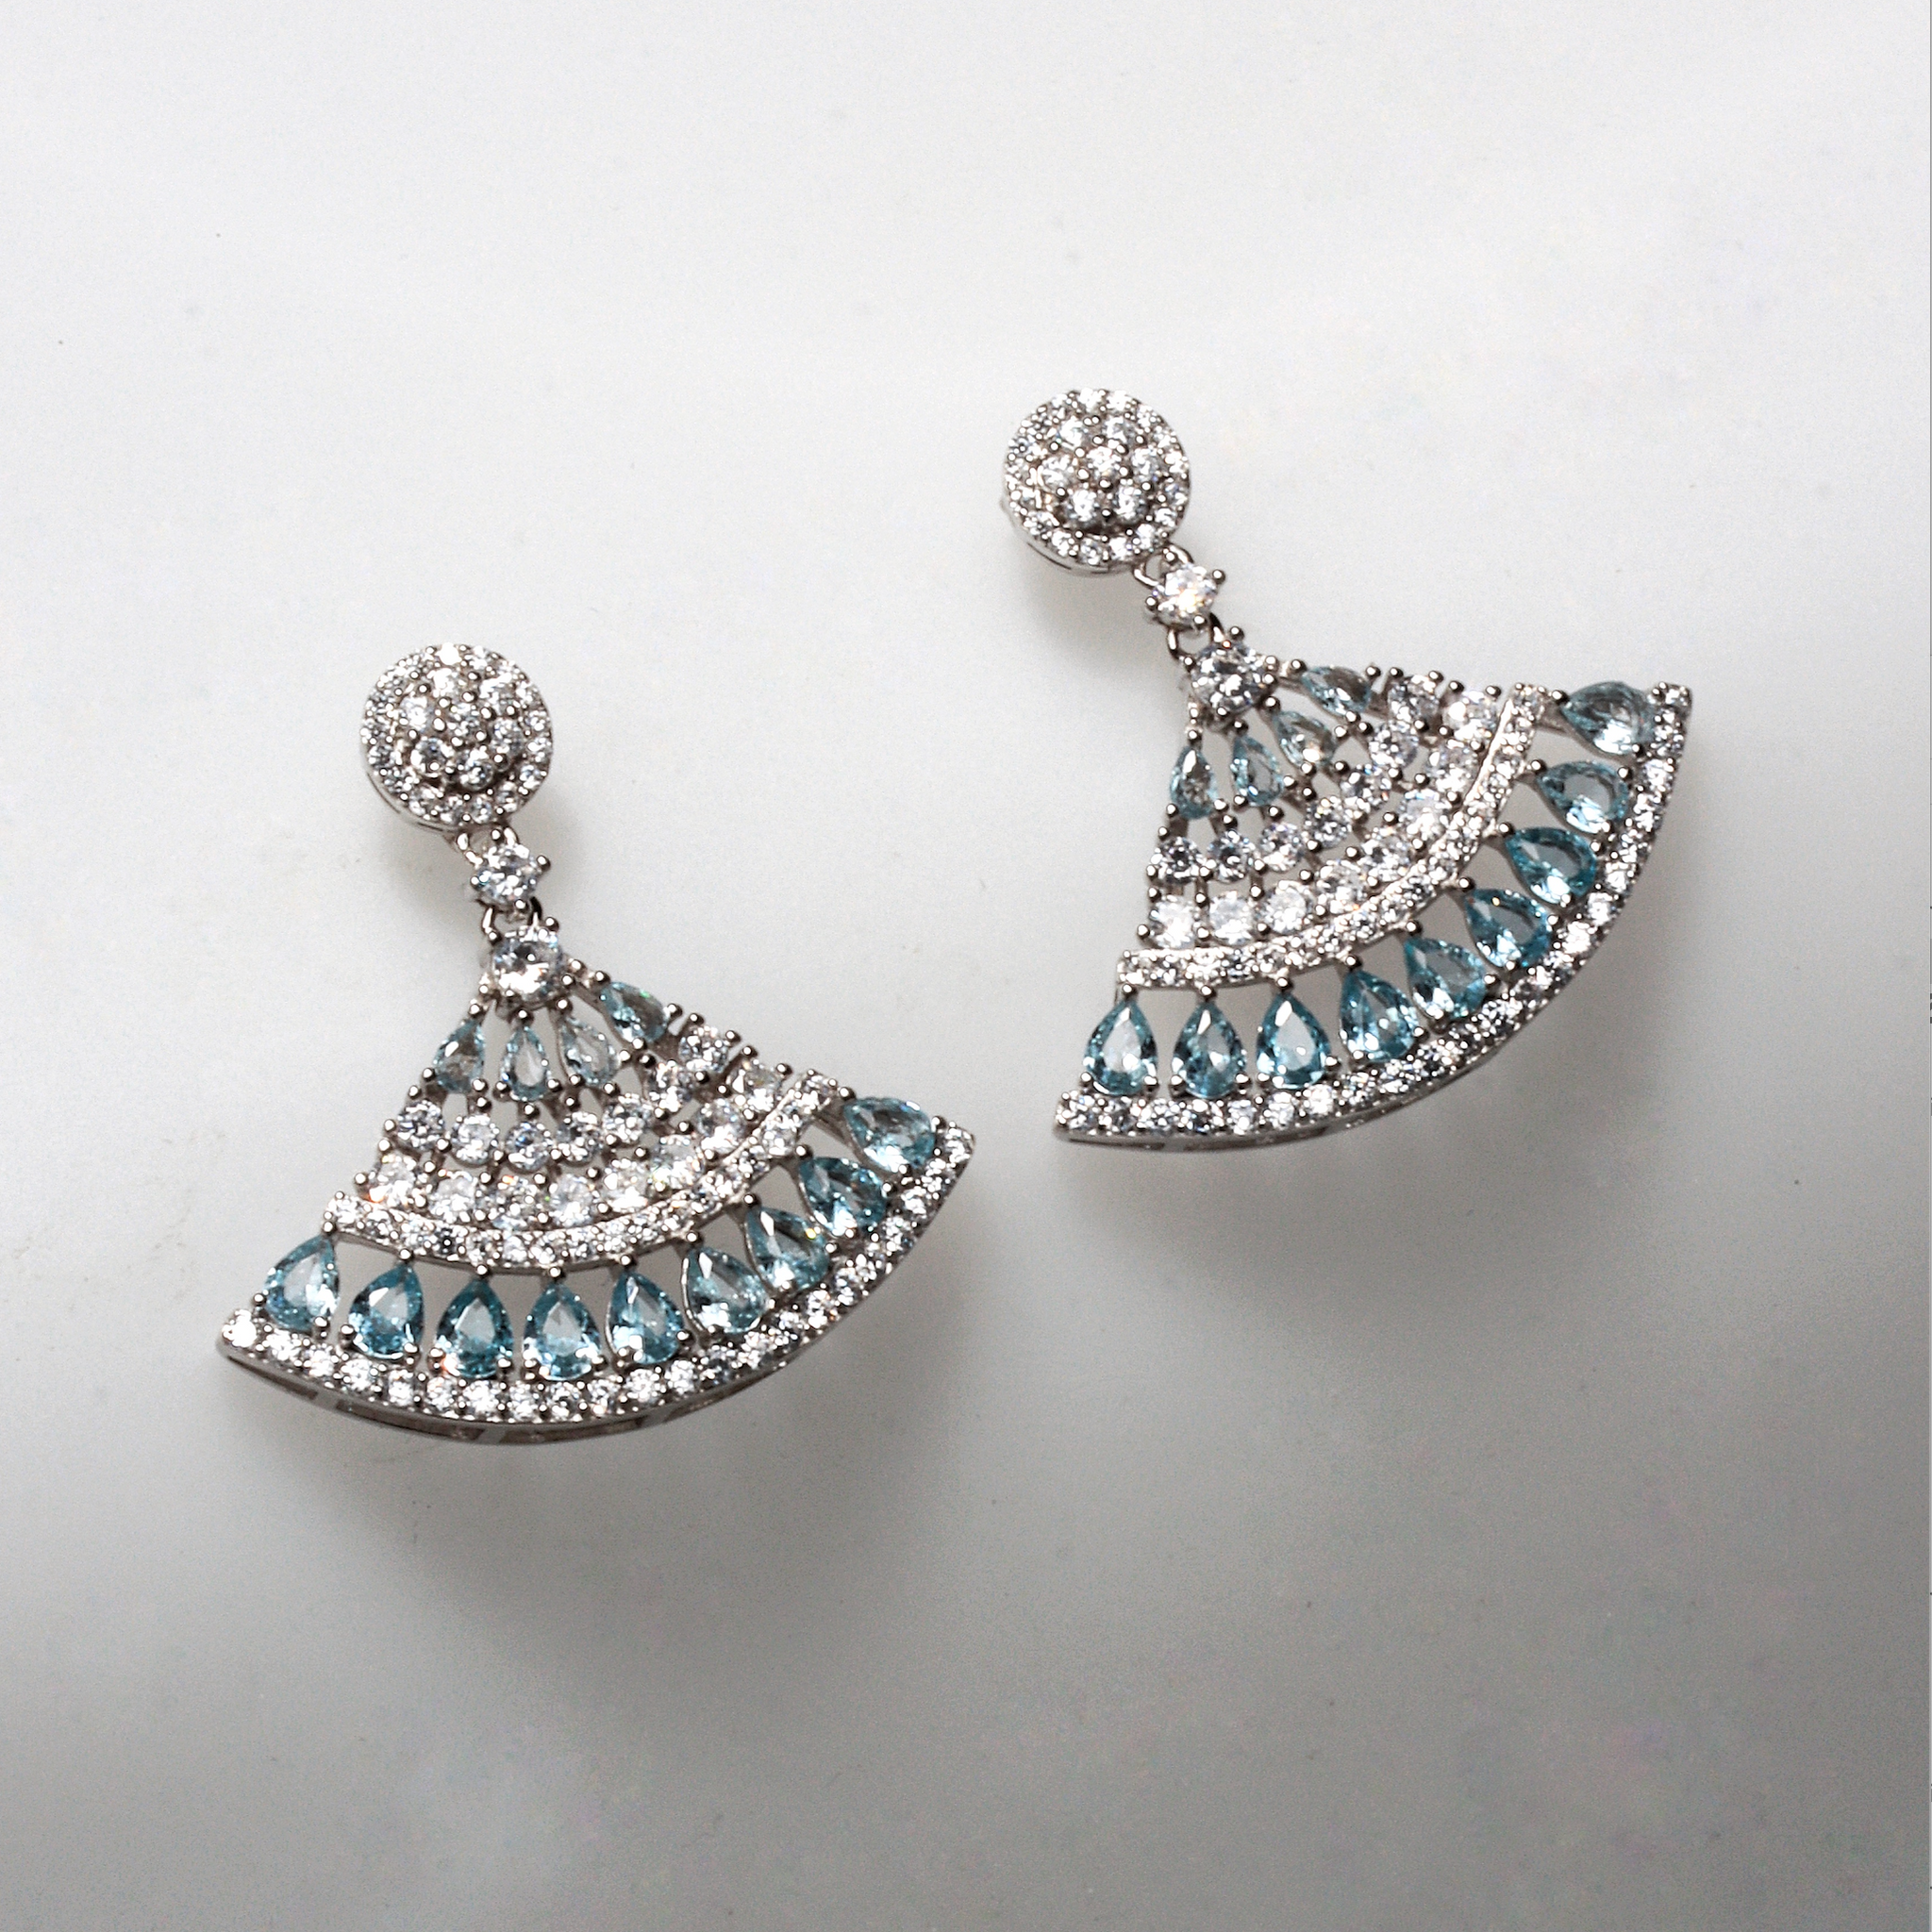 LUX BELLE WHITE SPINEL 925 SILVER EARRINGS BY ANITA BRAND